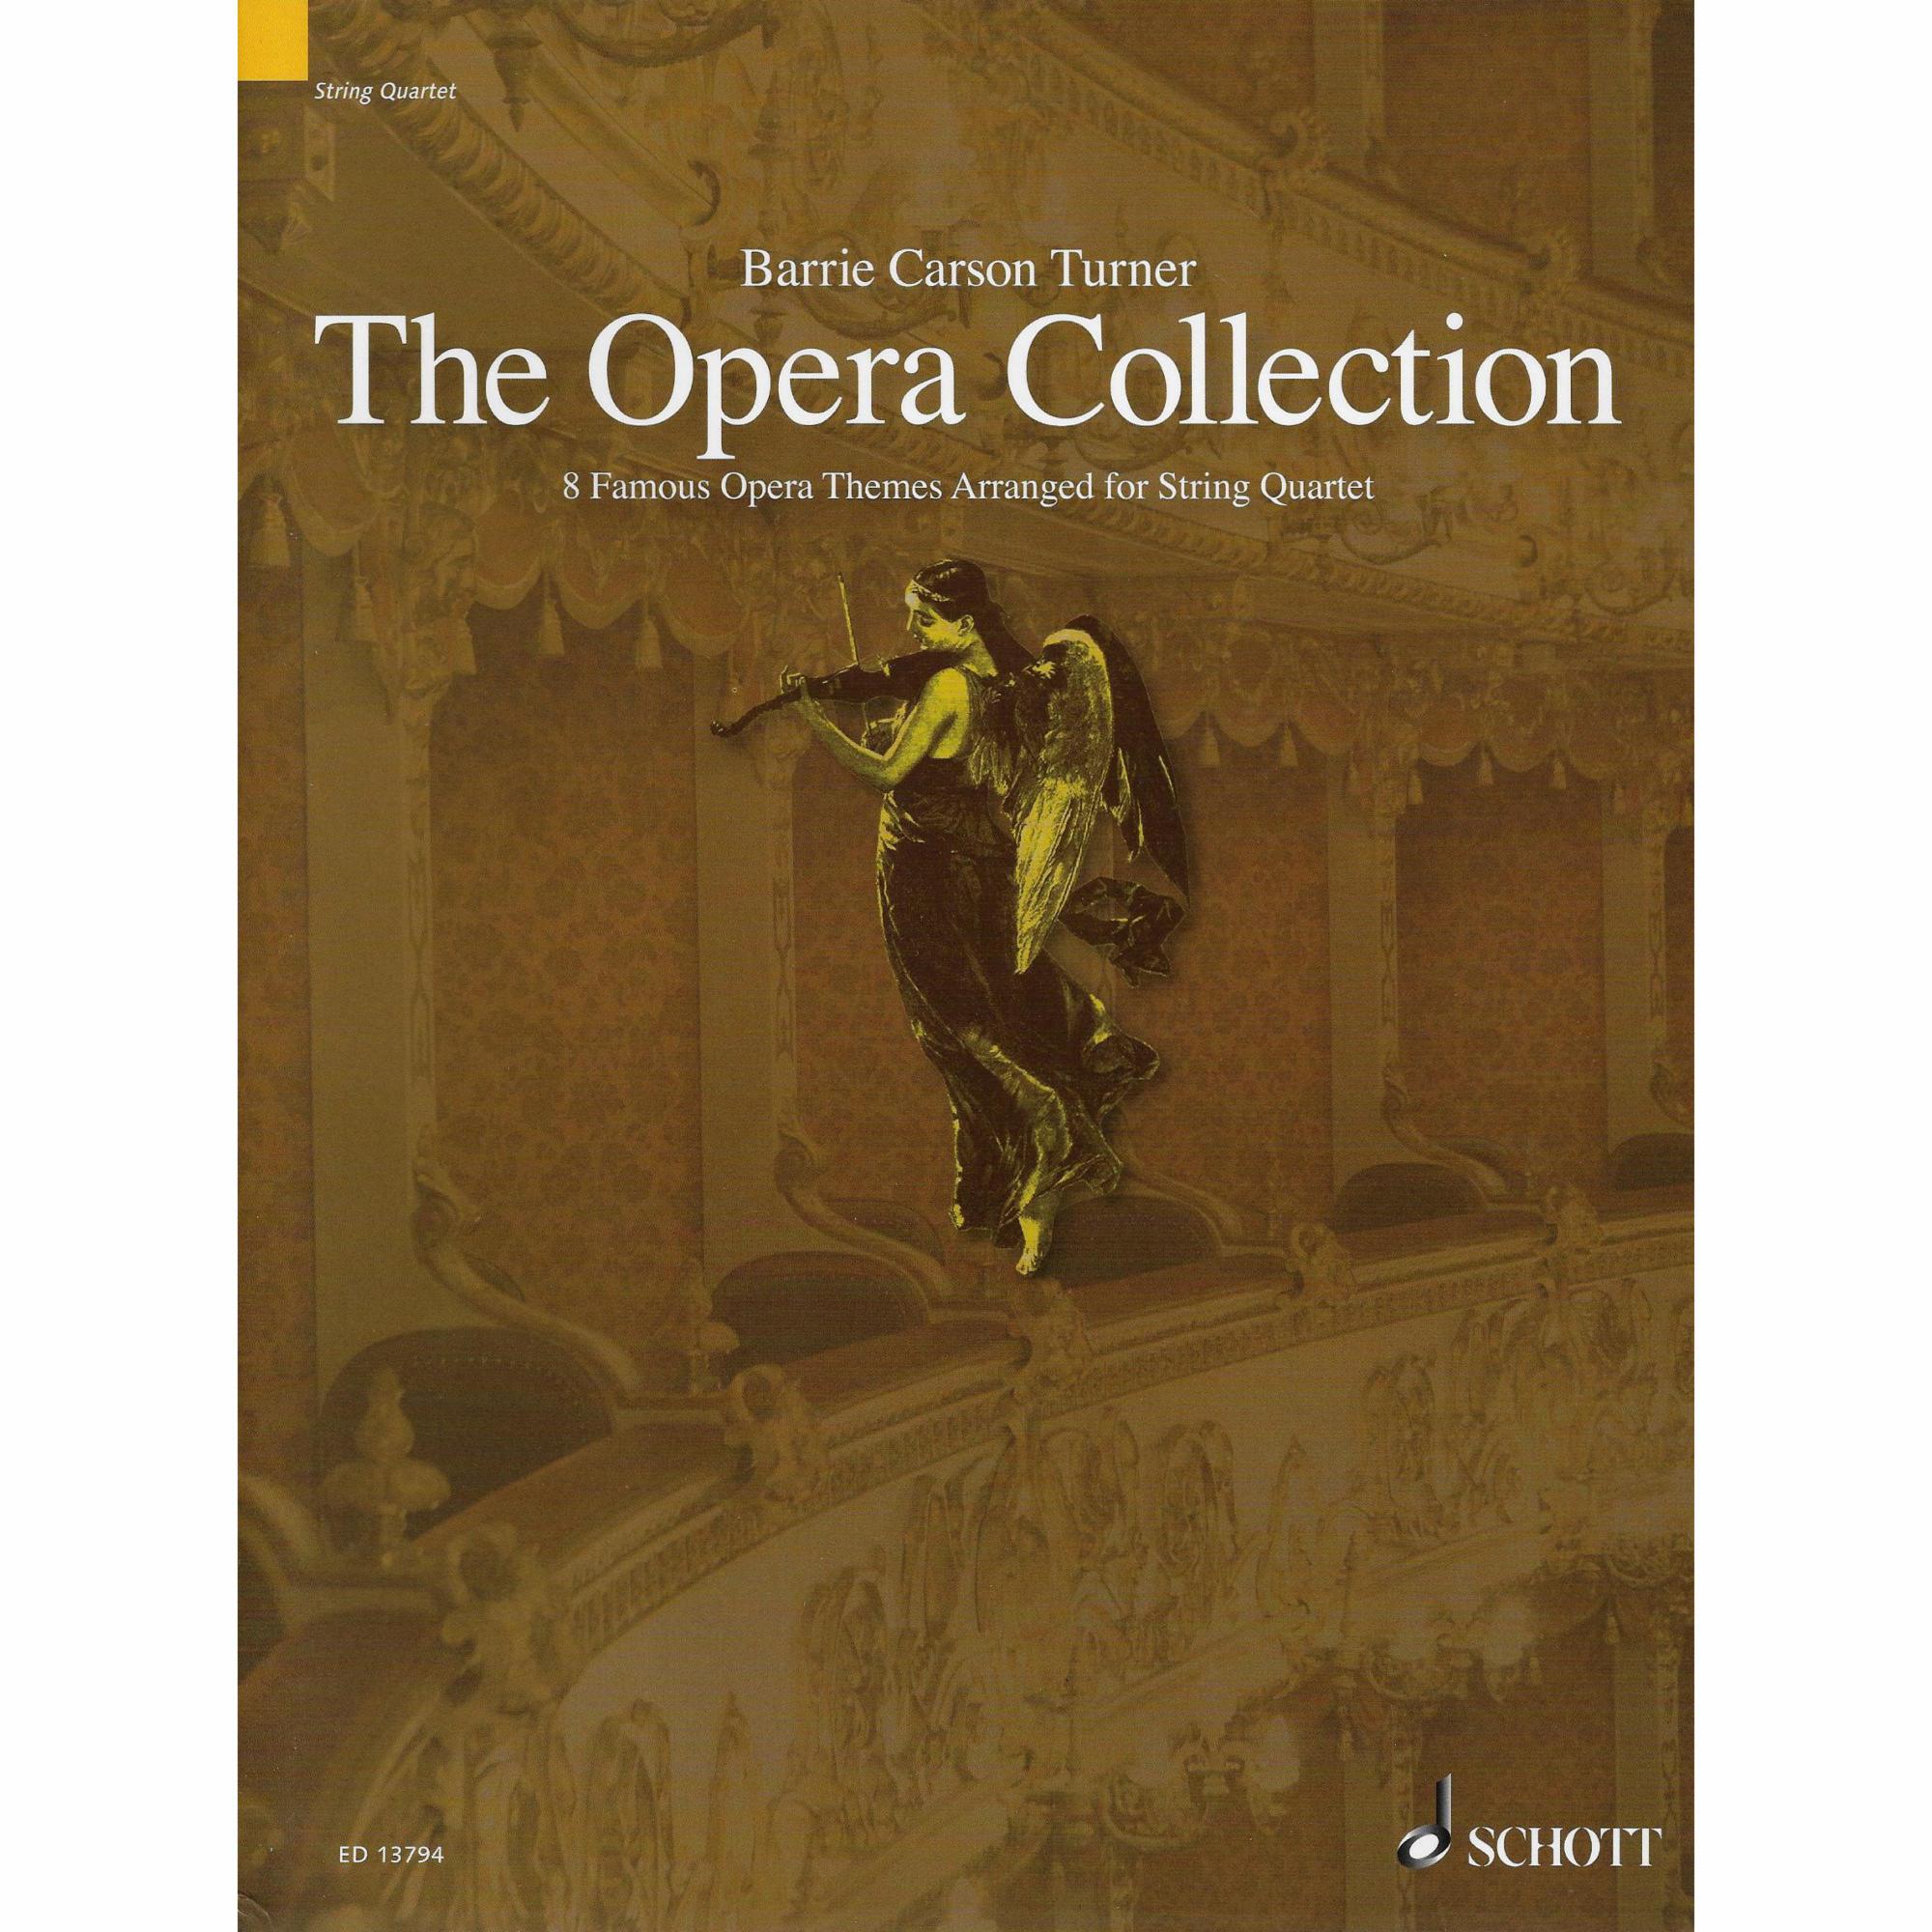 The Opera Collection: 8 Famous Opera Themes for String Quartet